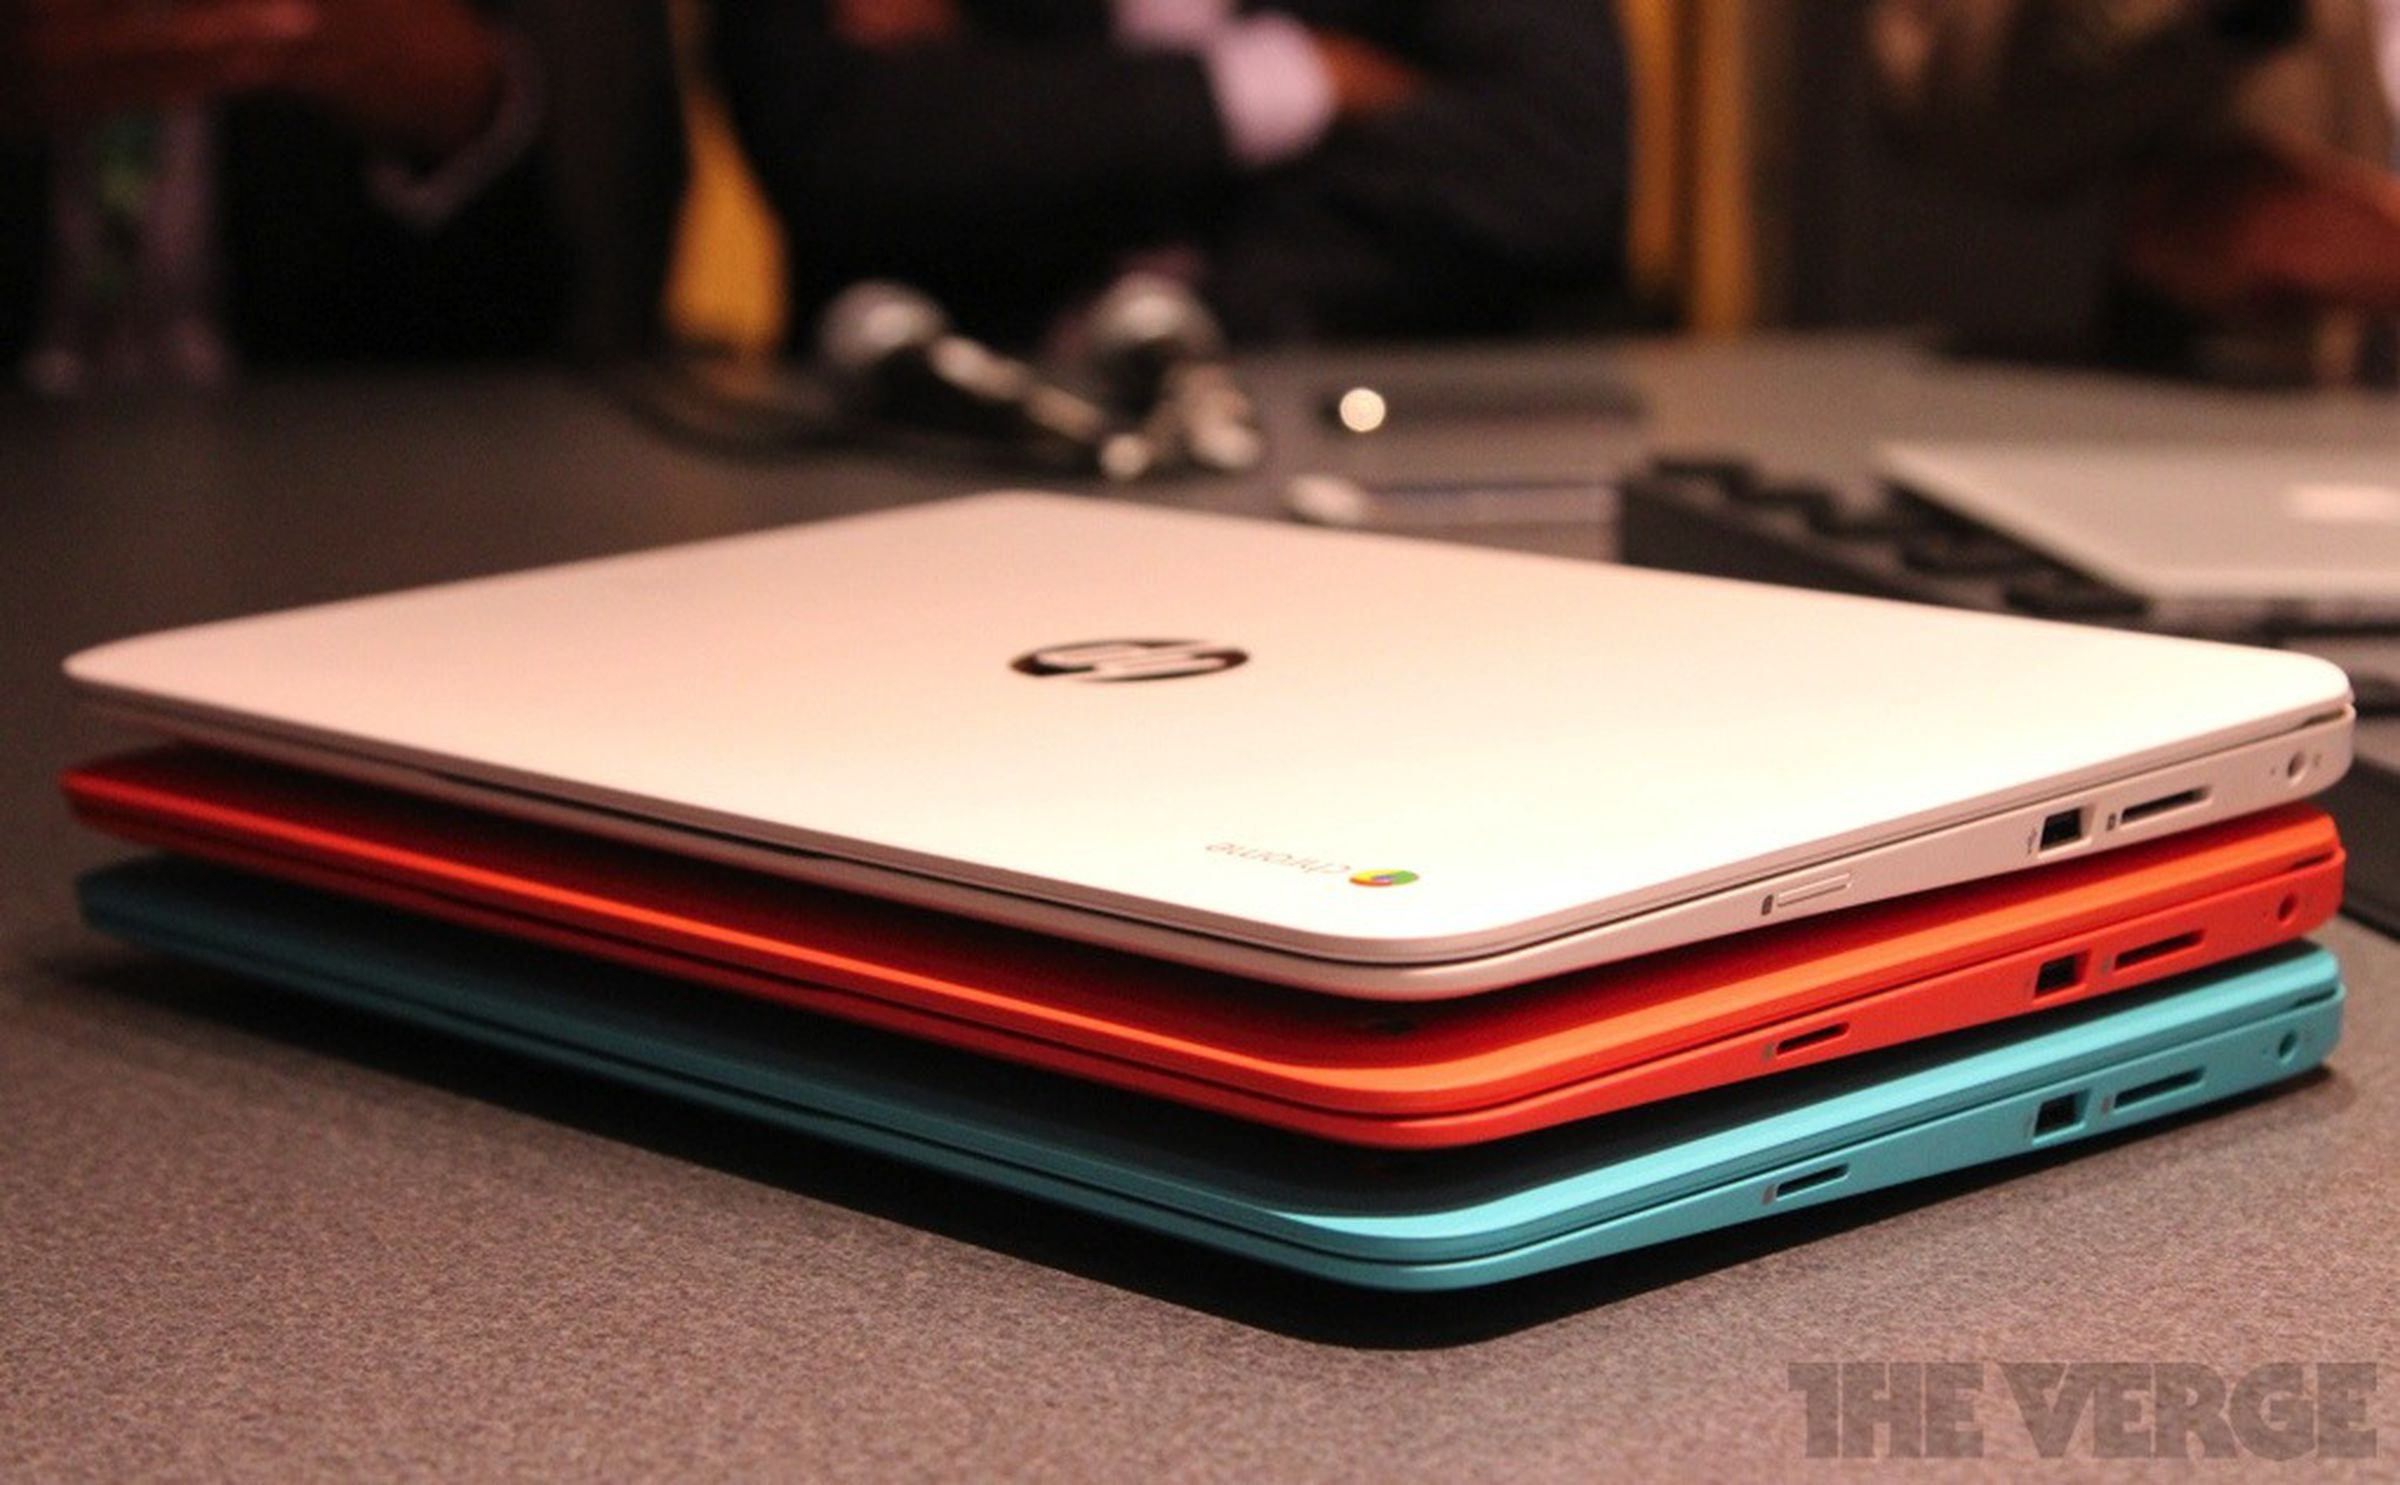 HP Chromebook 14 and Acer Chromebook hands-on pictures